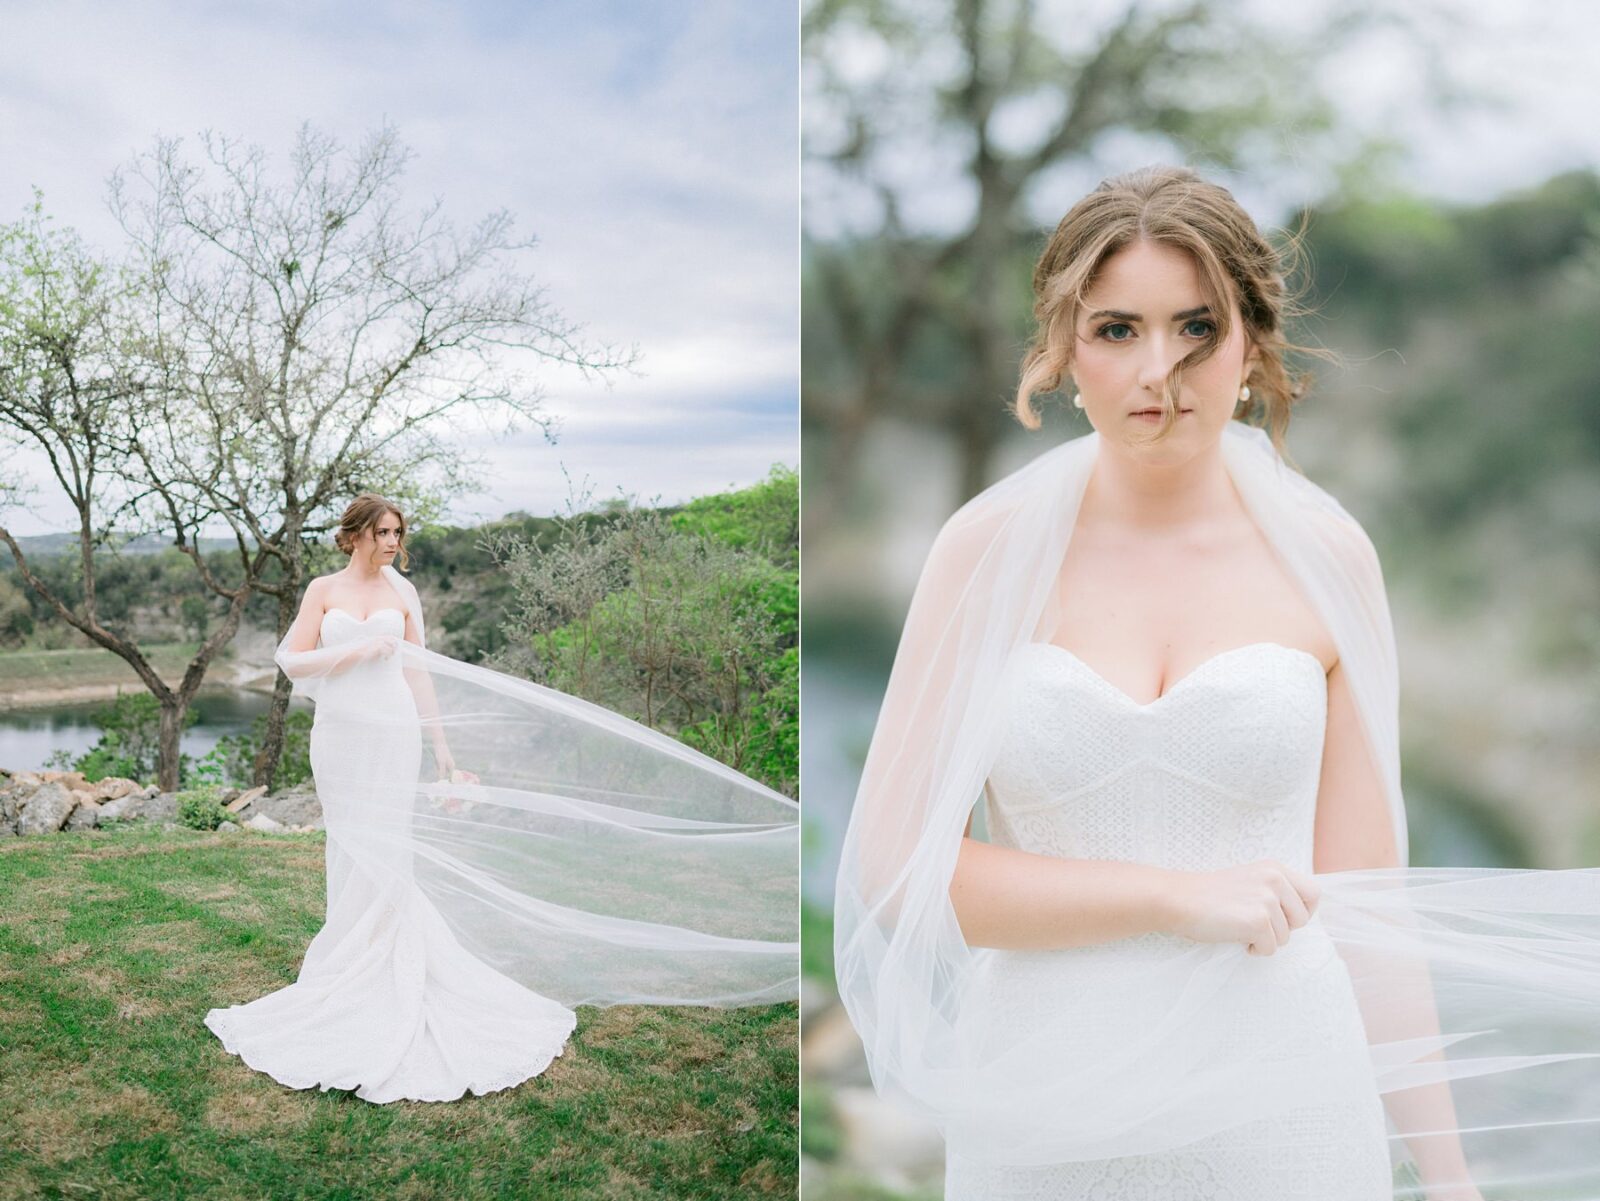 cathedral veil, long veil blowing in wind, moody bridal session, winter bridal session, bridal session, bride photography, the videre estate, hill country wedding venue, wimberley wedding venue, austin wedding photography, tara paige weddings, 